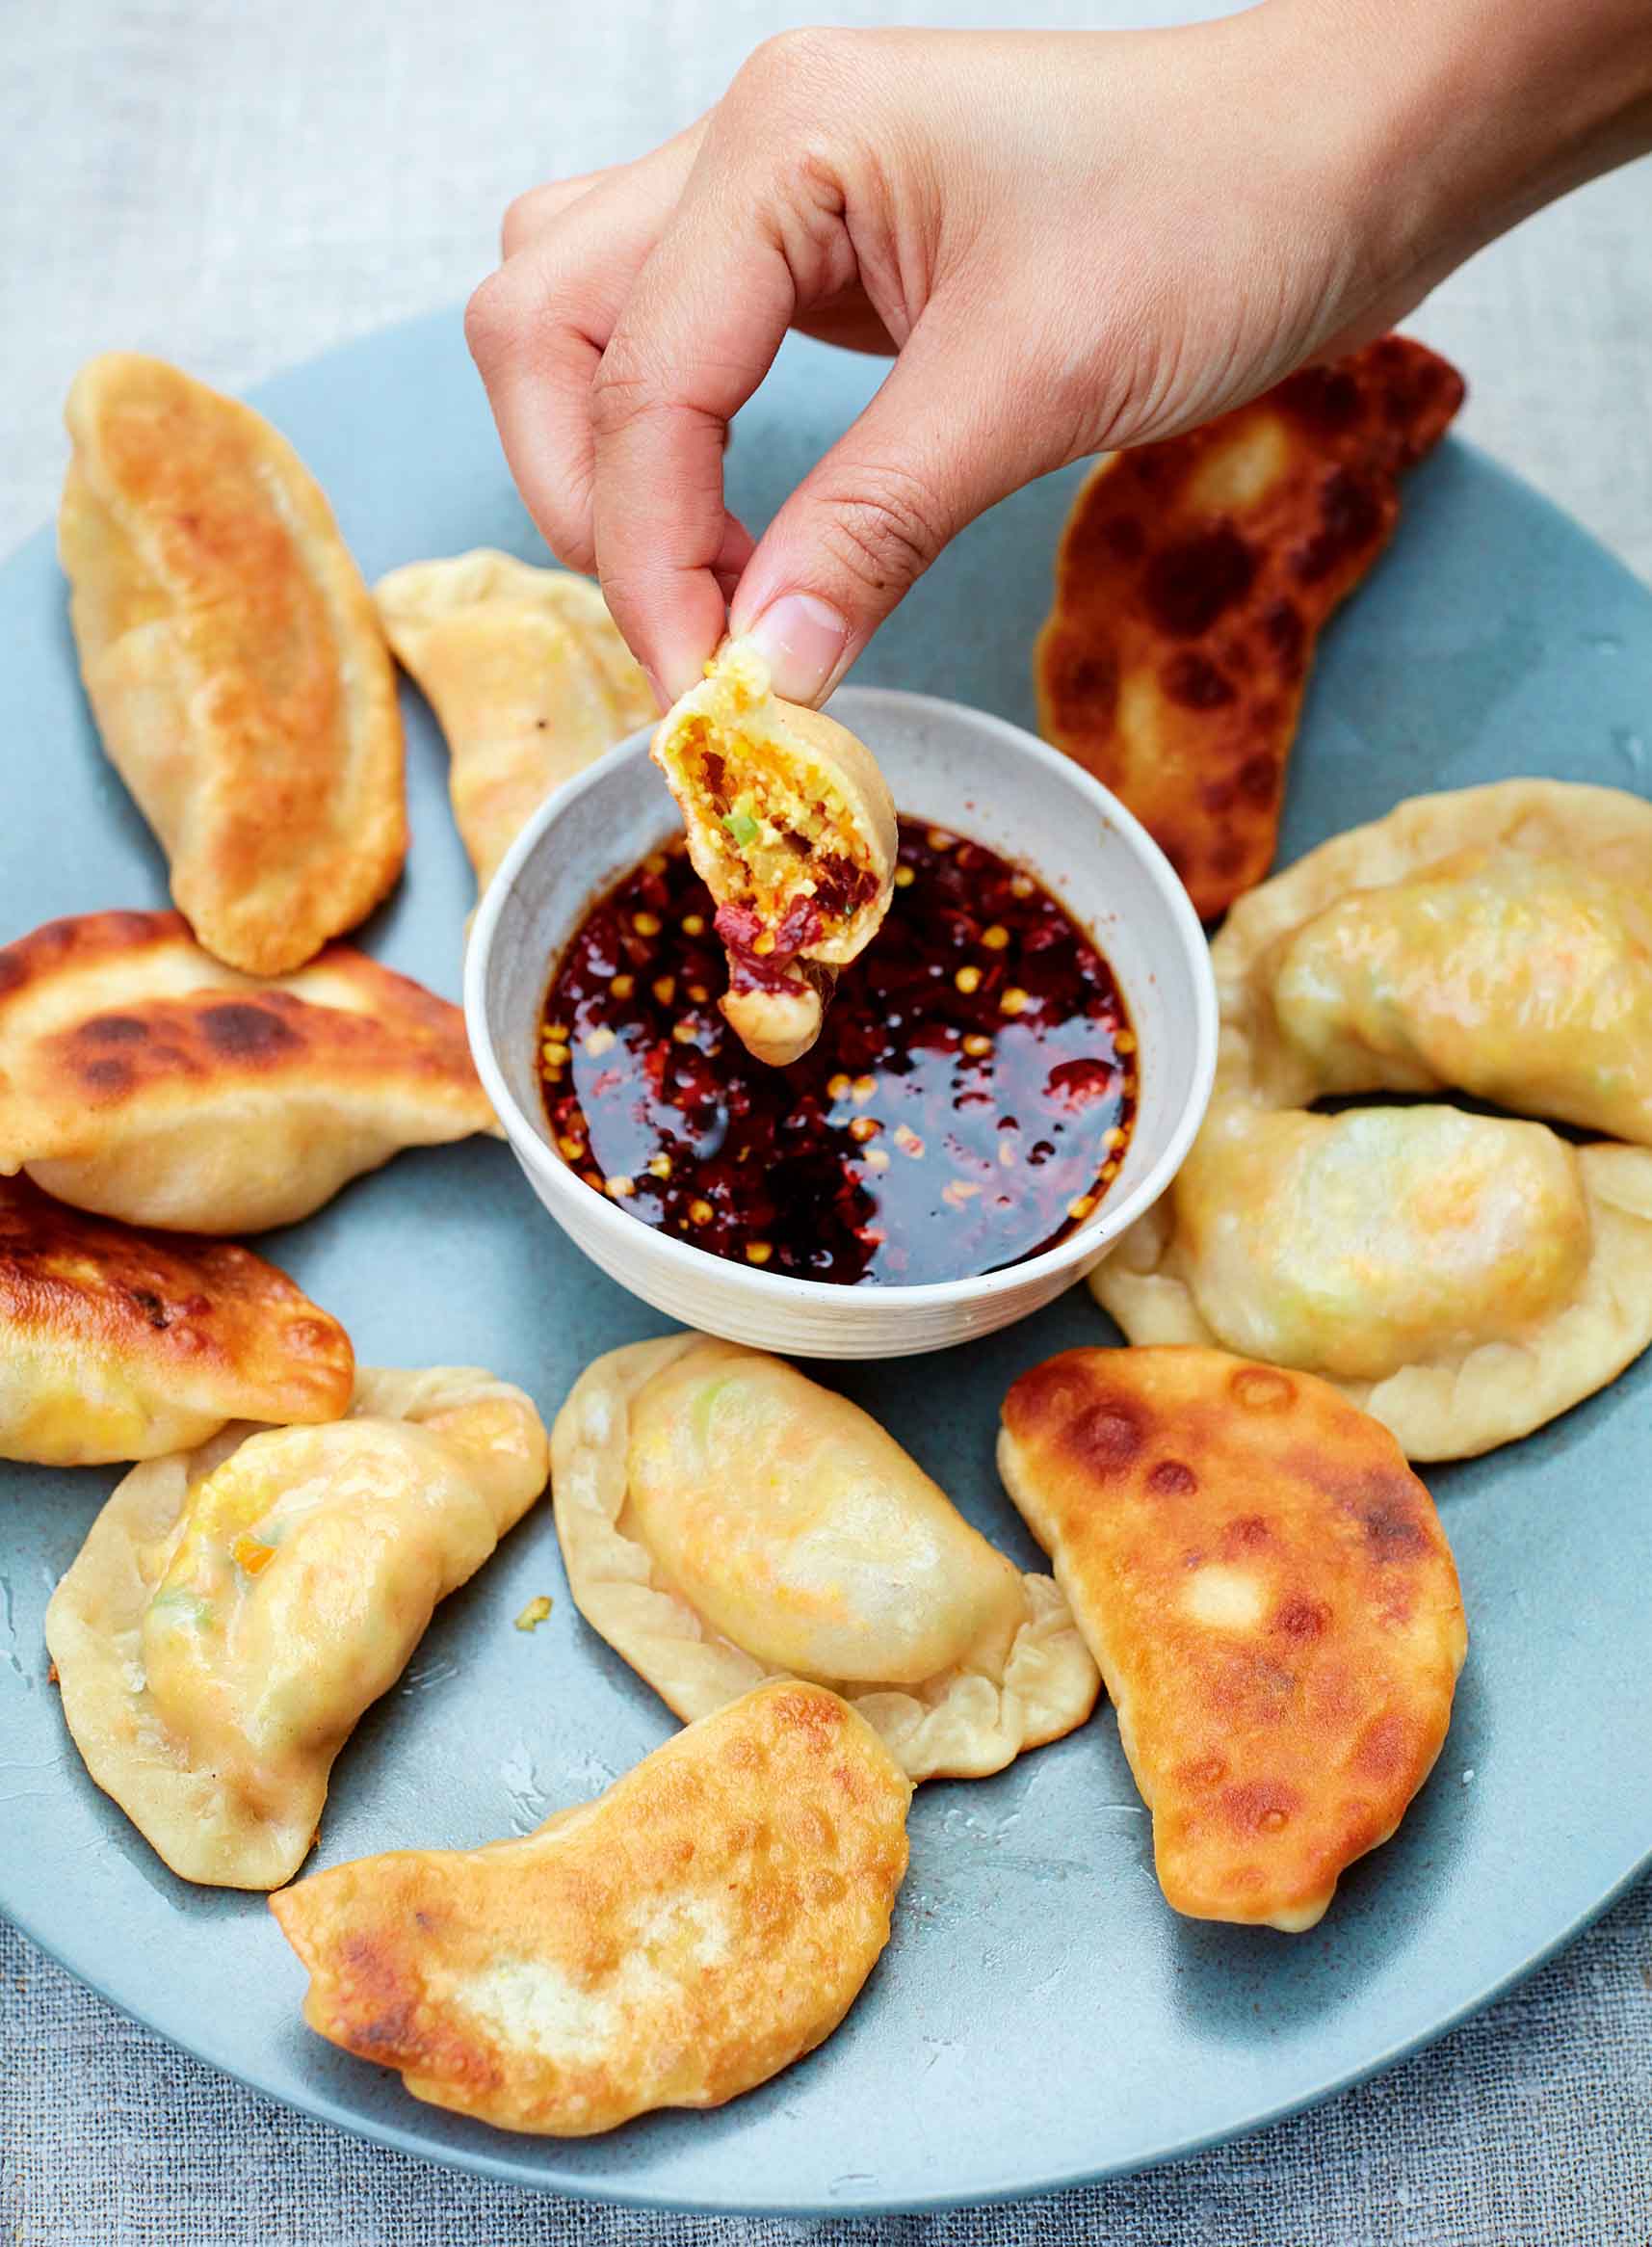 DARJEELING MOMOS WITH SPICY DIPPING SAUCE